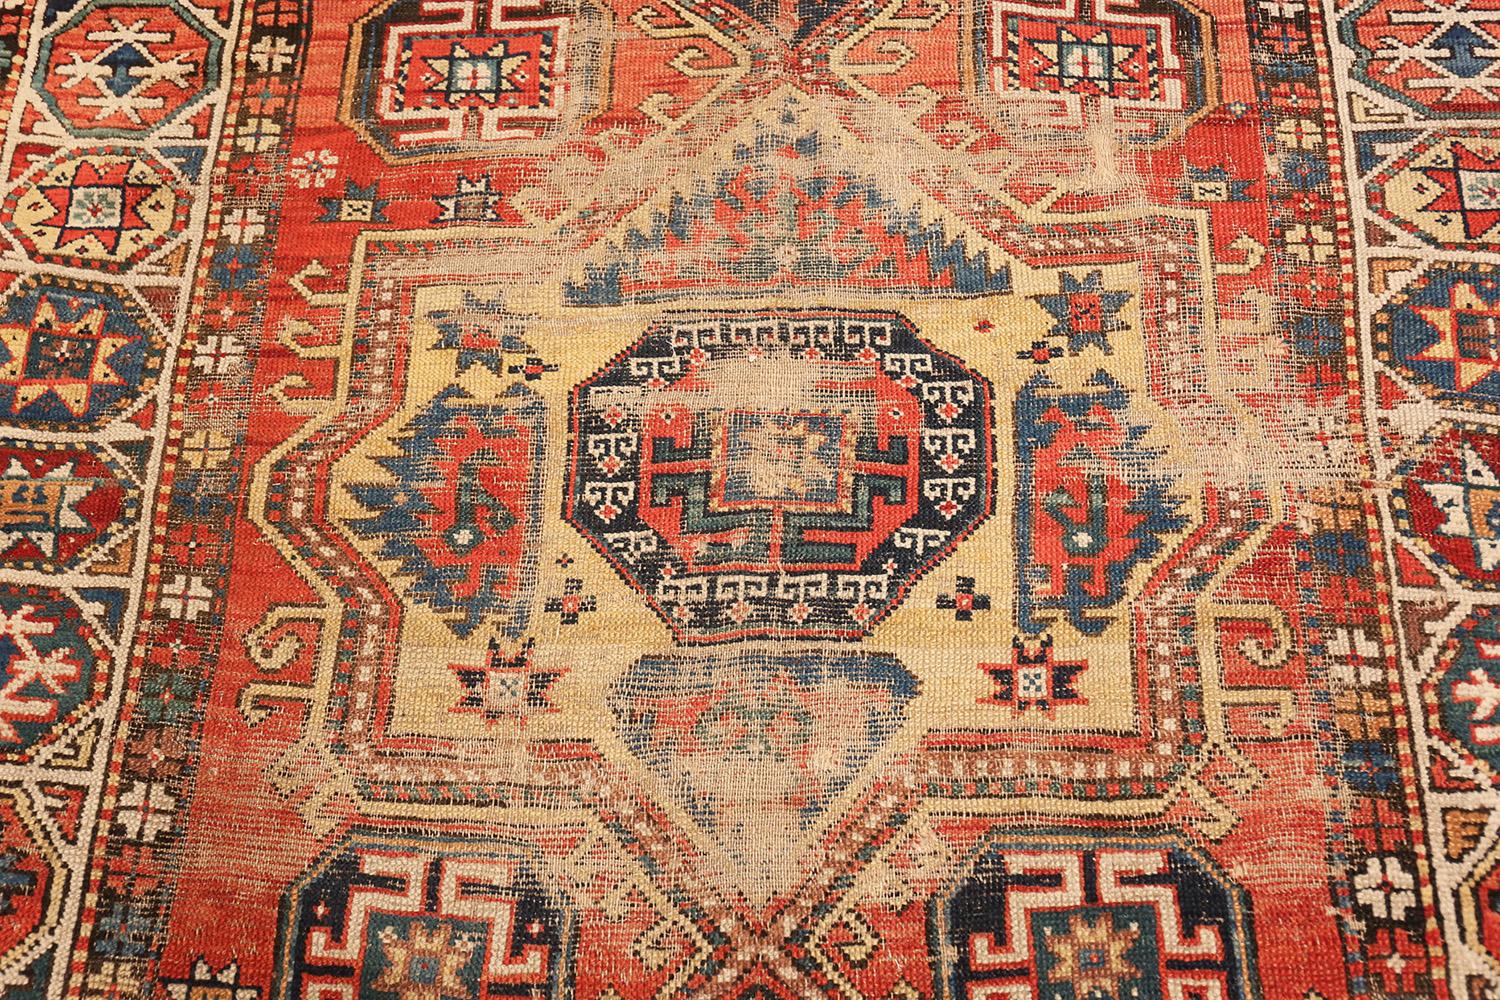 A Beautifully Tribal Antique Worn and Distressed Shabby Chic Caucasian Kazak Rug, Country Of Origin: Caucasus, Circa Date: 1880. Size: 4 ft 10 in x 9 ft 6 in (1.47 m x 2.9 m)

This charming, tribal antique Caucasian Kazak rug was created in the